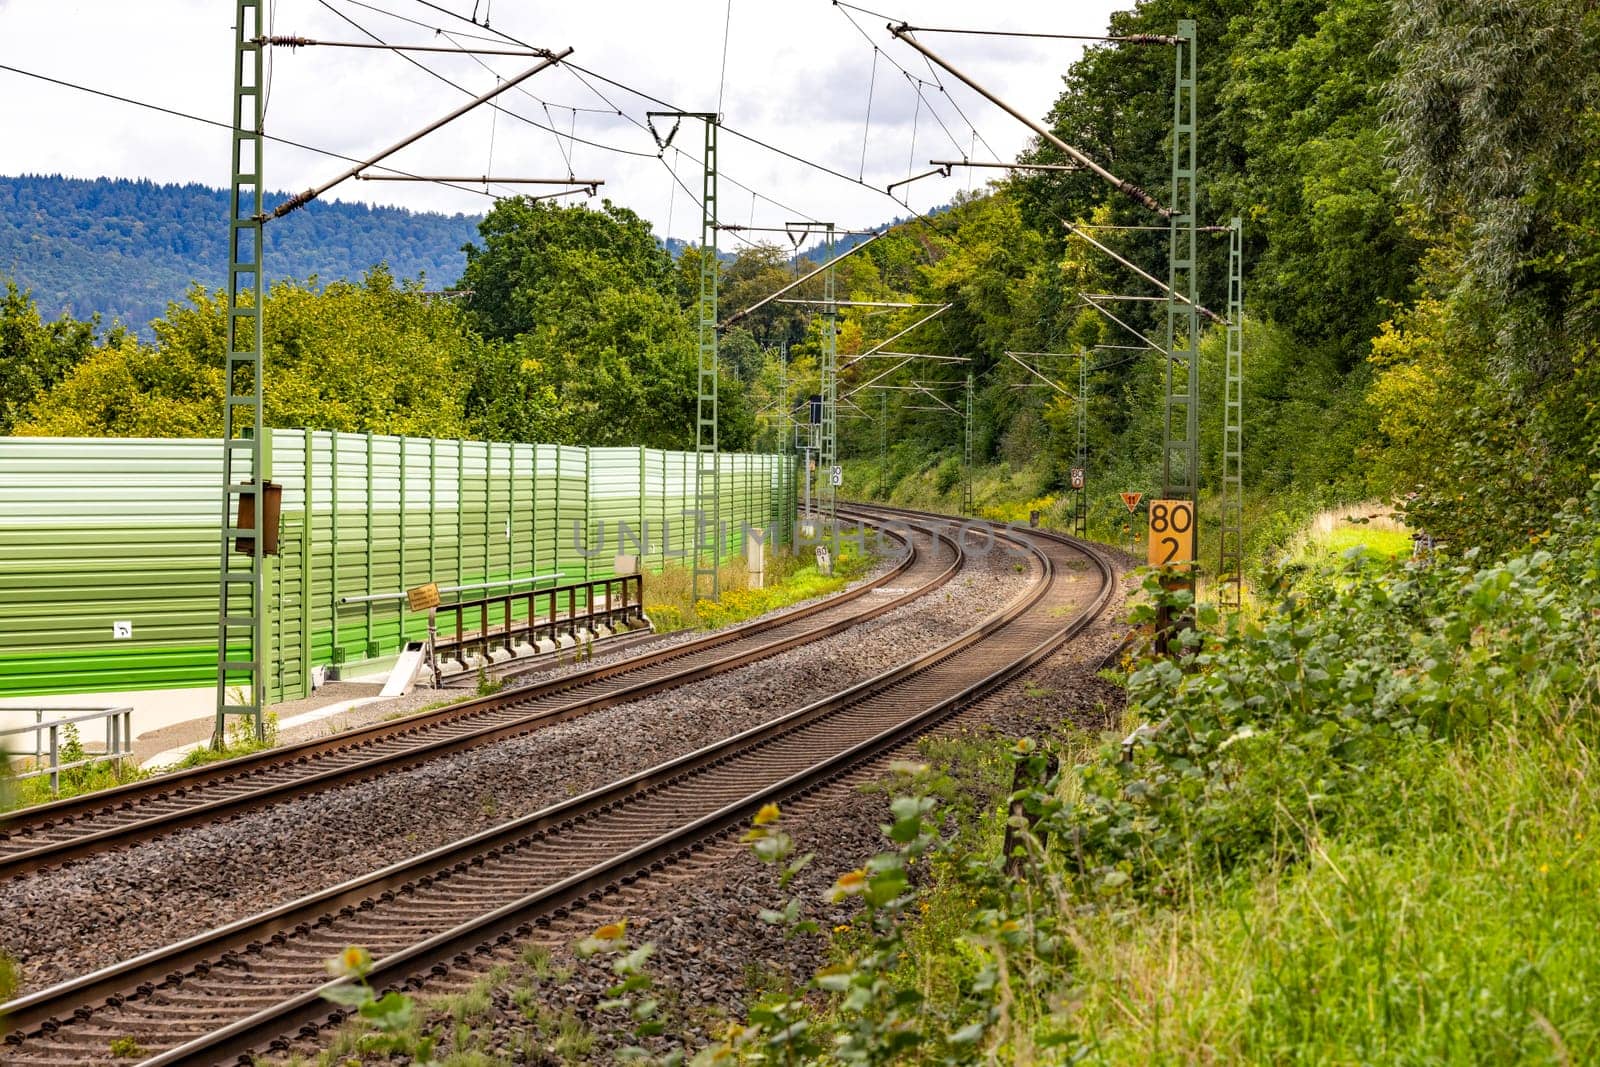 Two parallel tracks of a railroad line run next to a noise barrier through rural Bavaria